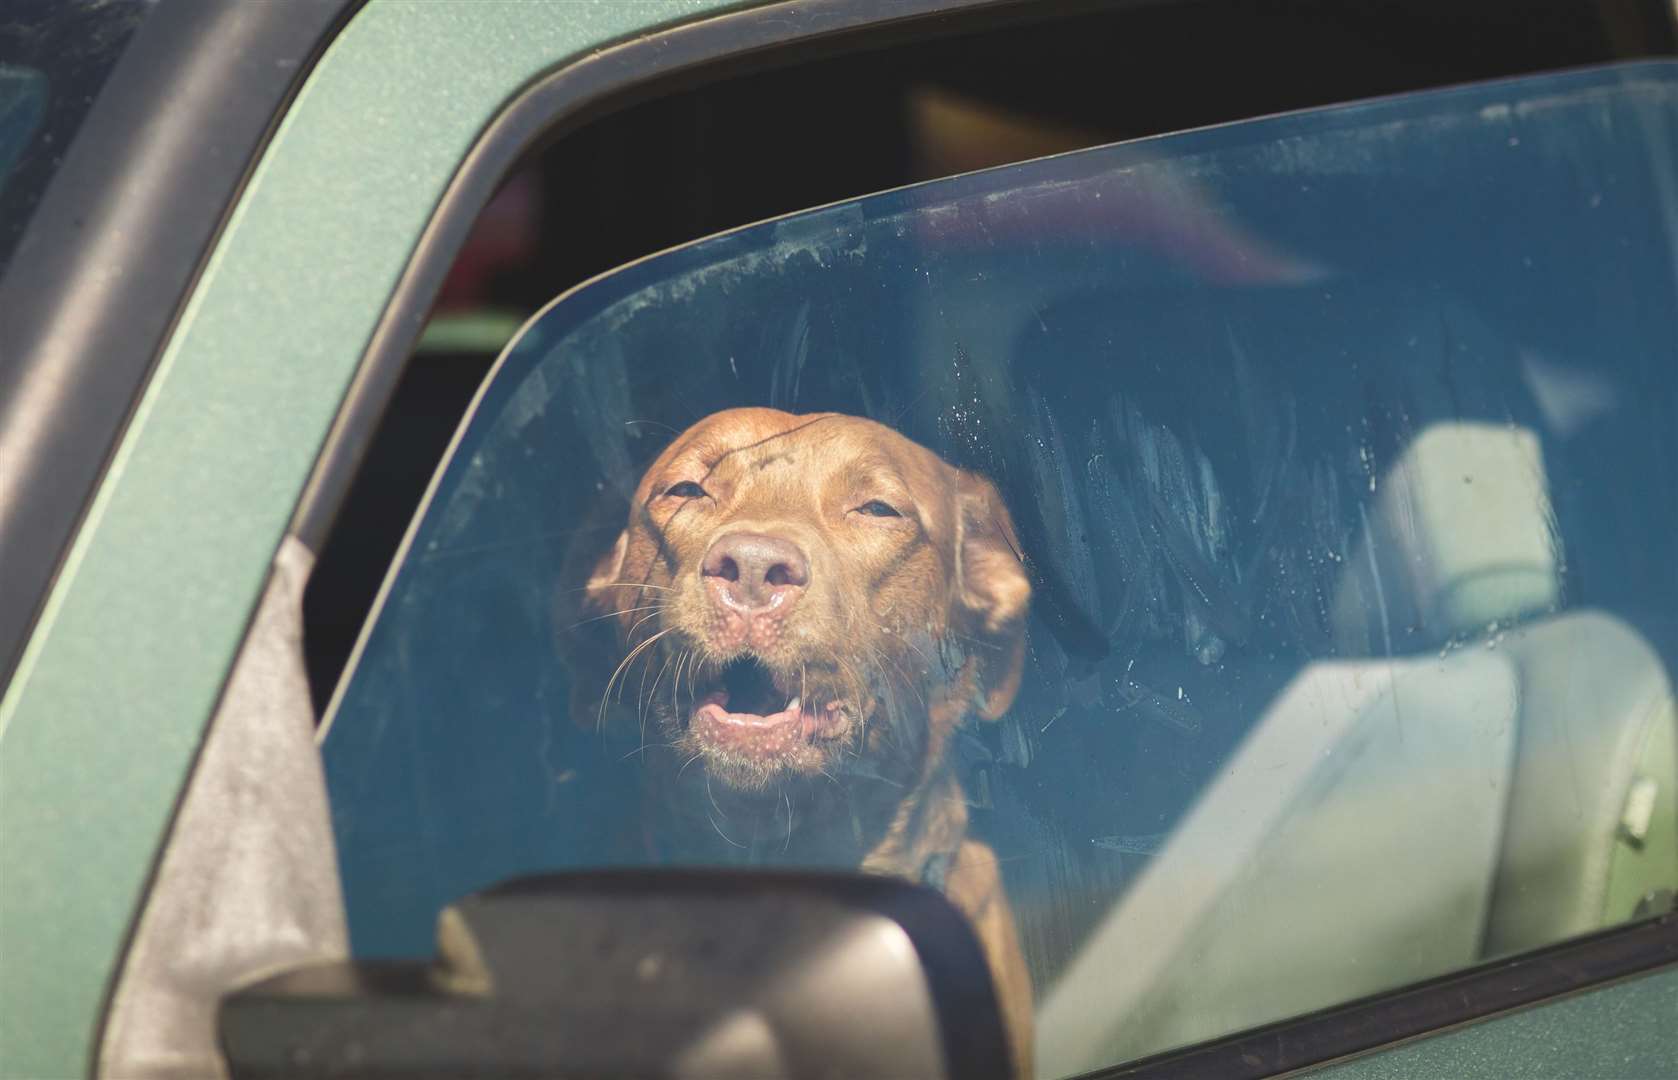 If you notice a dog in distress inside a car your first call is to the police. Image: iStock.